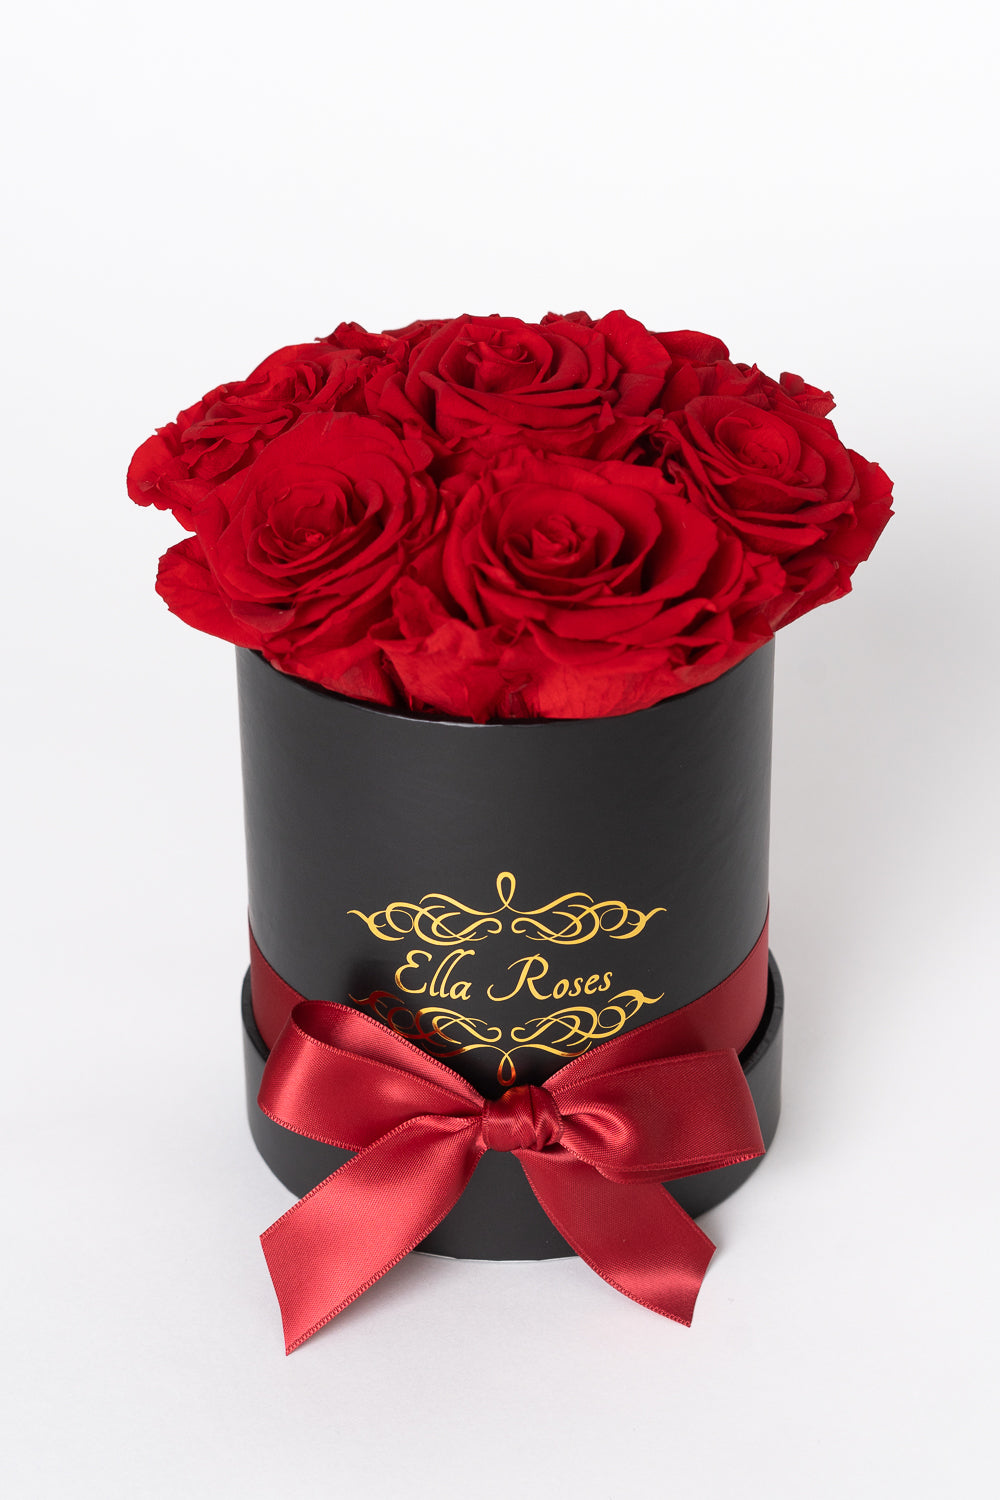 Medium Round Black Hat Box with Two Dozen Red Everlasting Preserved Roses | The Only Roses